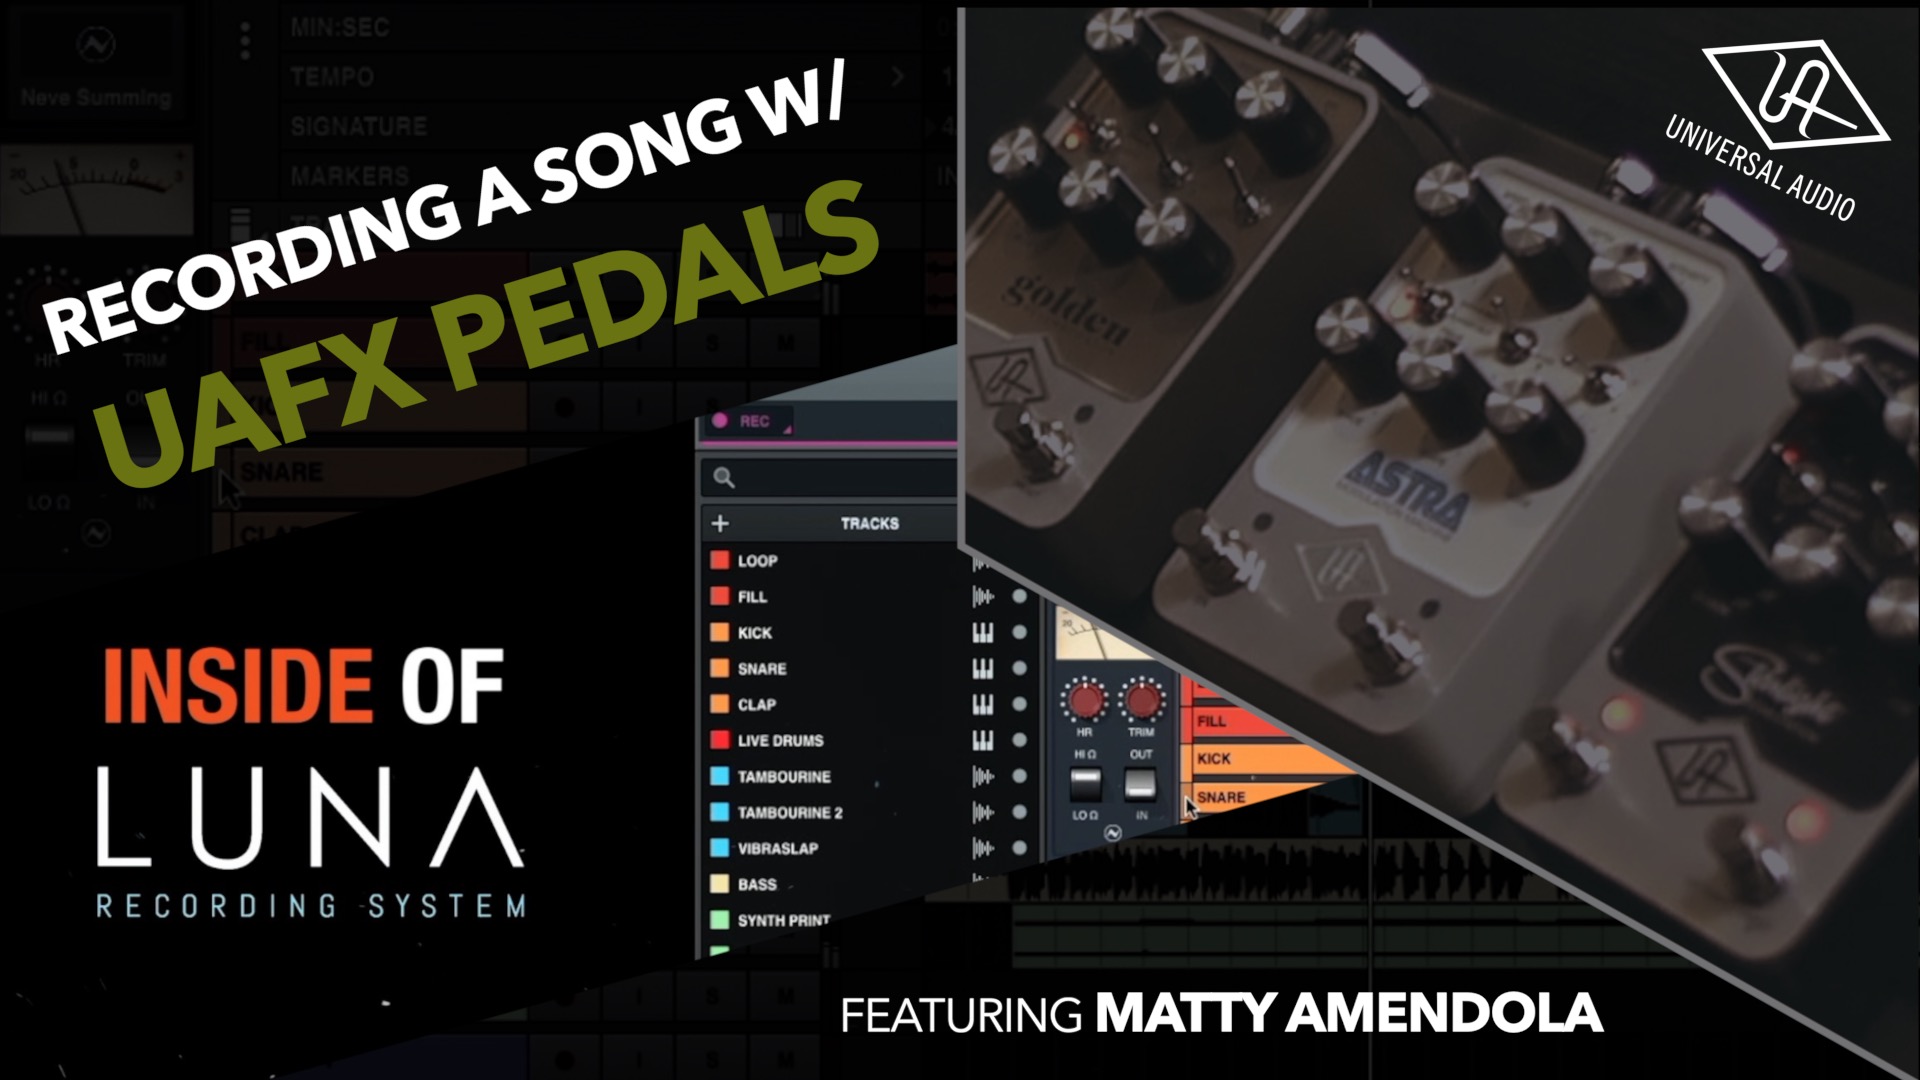 Recording Guitars (and Drum Synths) with Universal Audio’s New UAFX Pedals